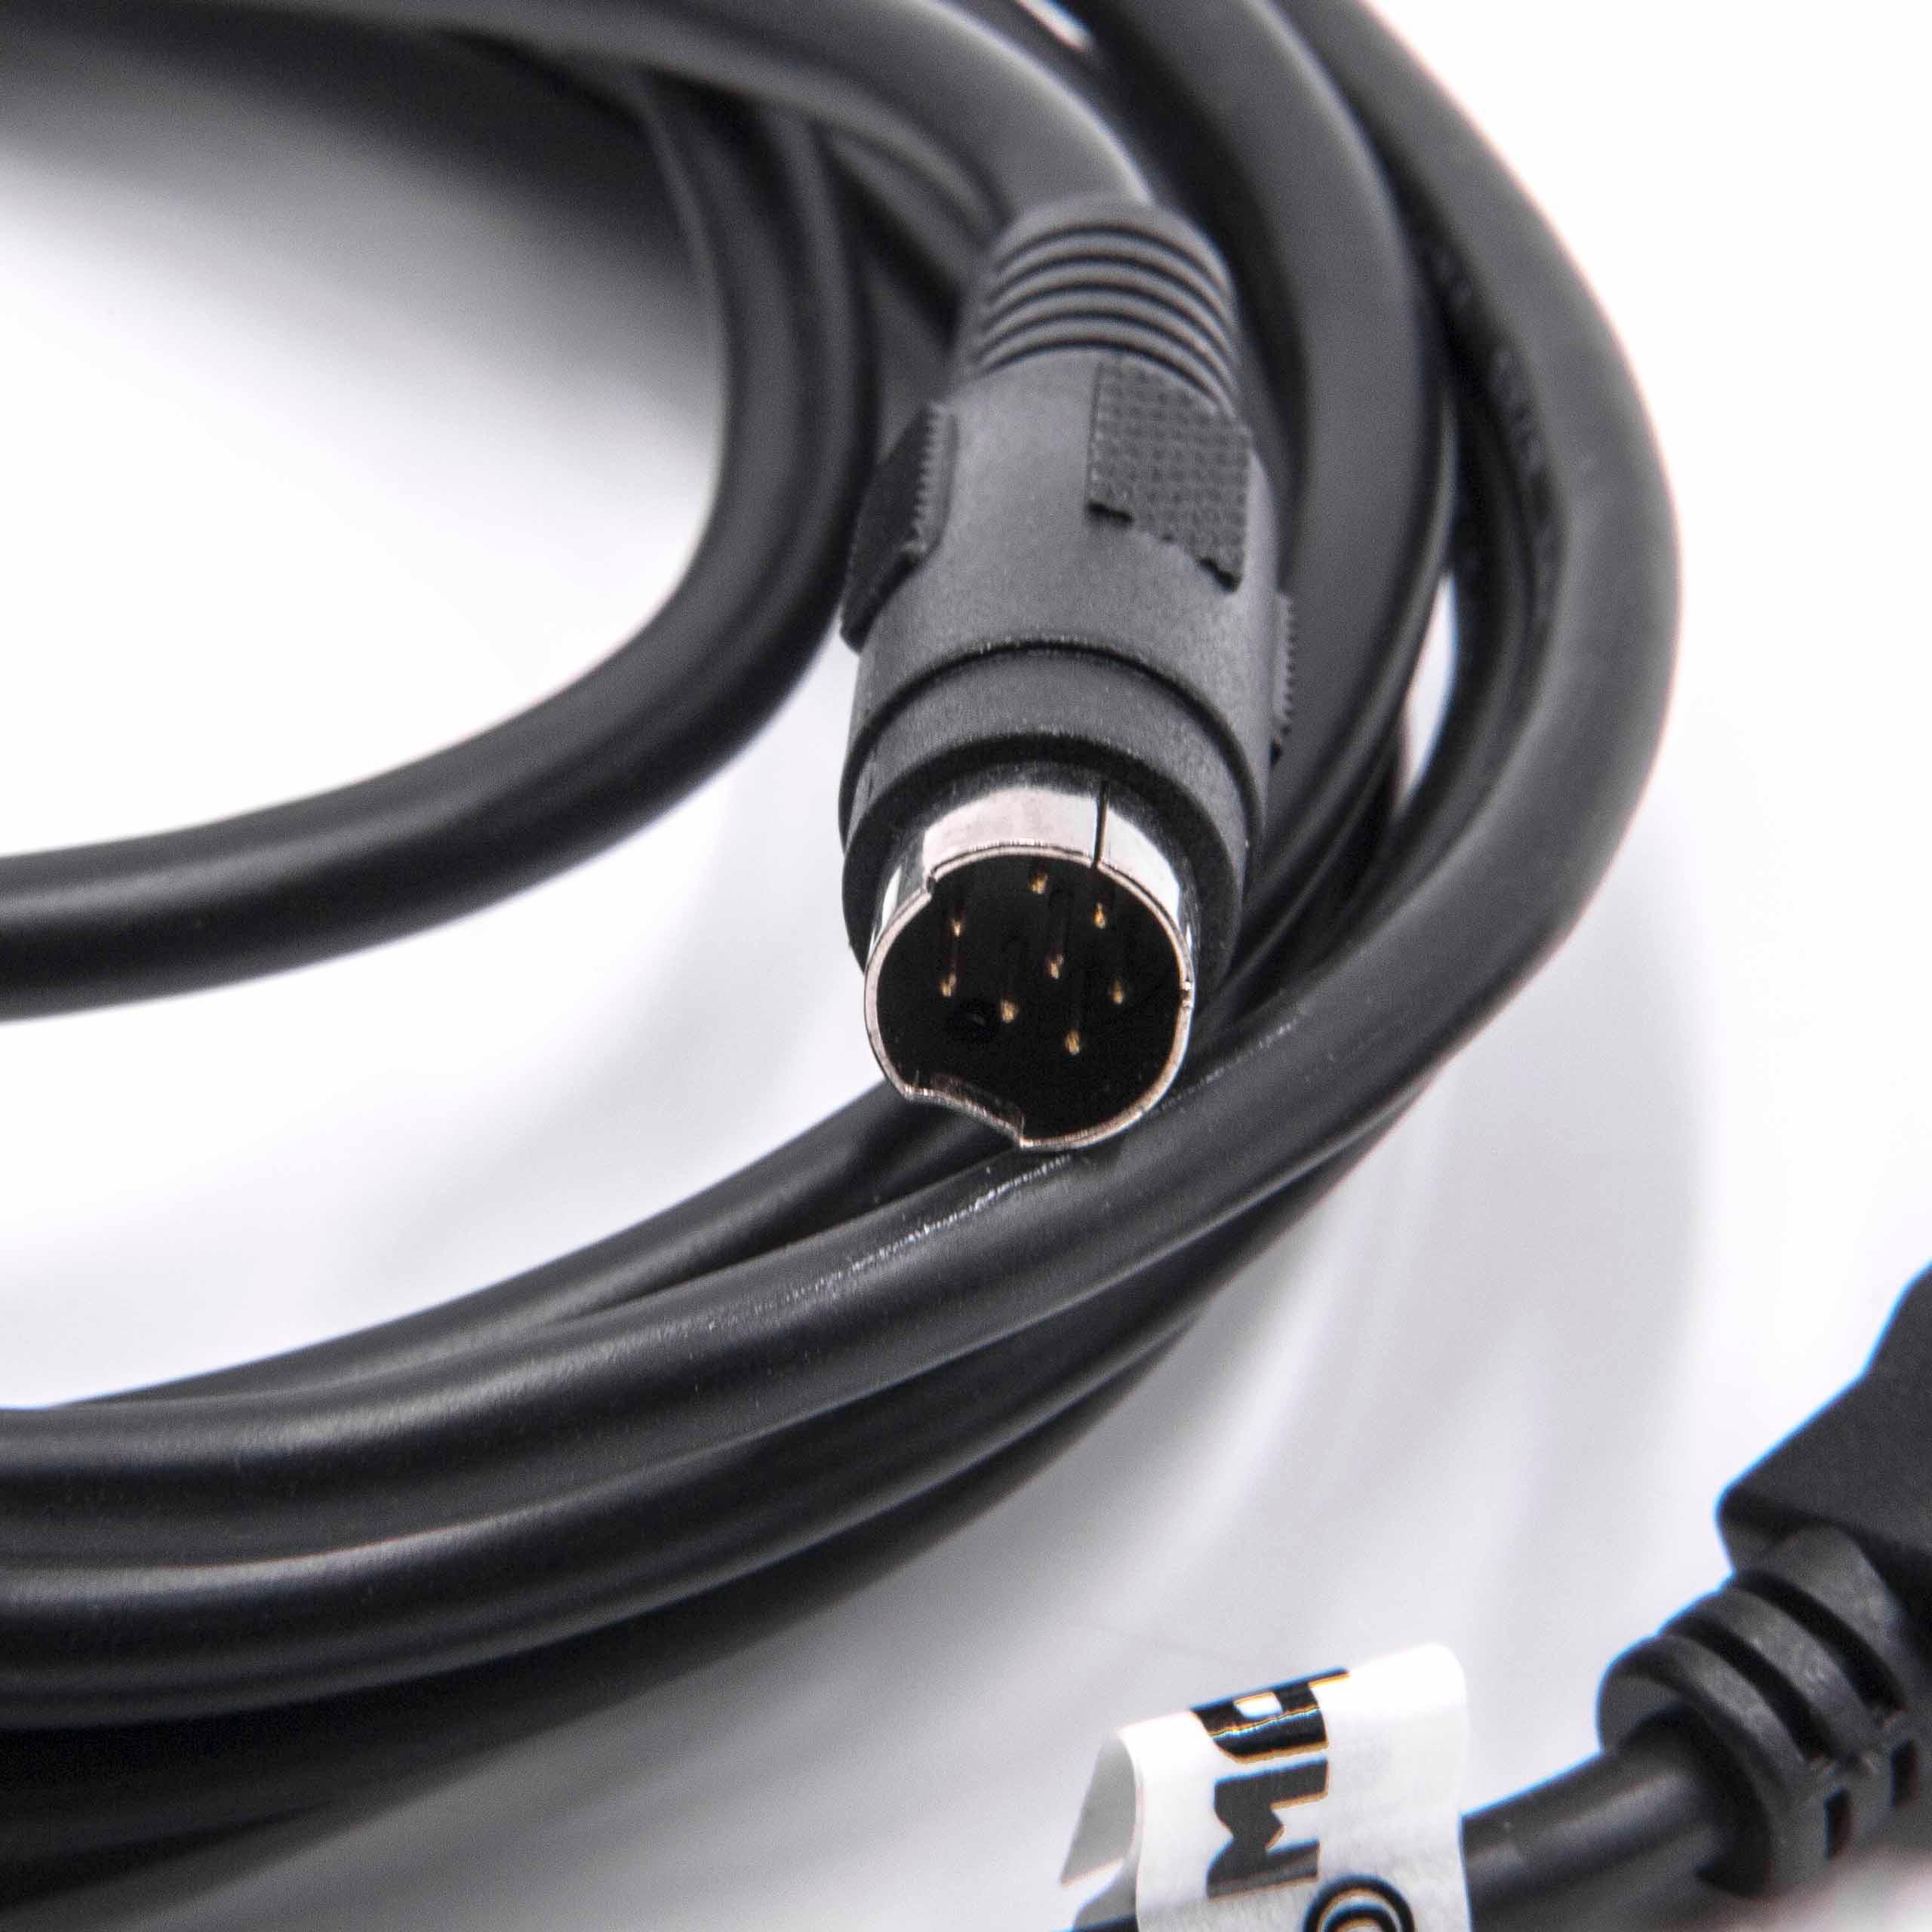 Programming Cable replaces USB-1761-CBL-PM02 forRadio